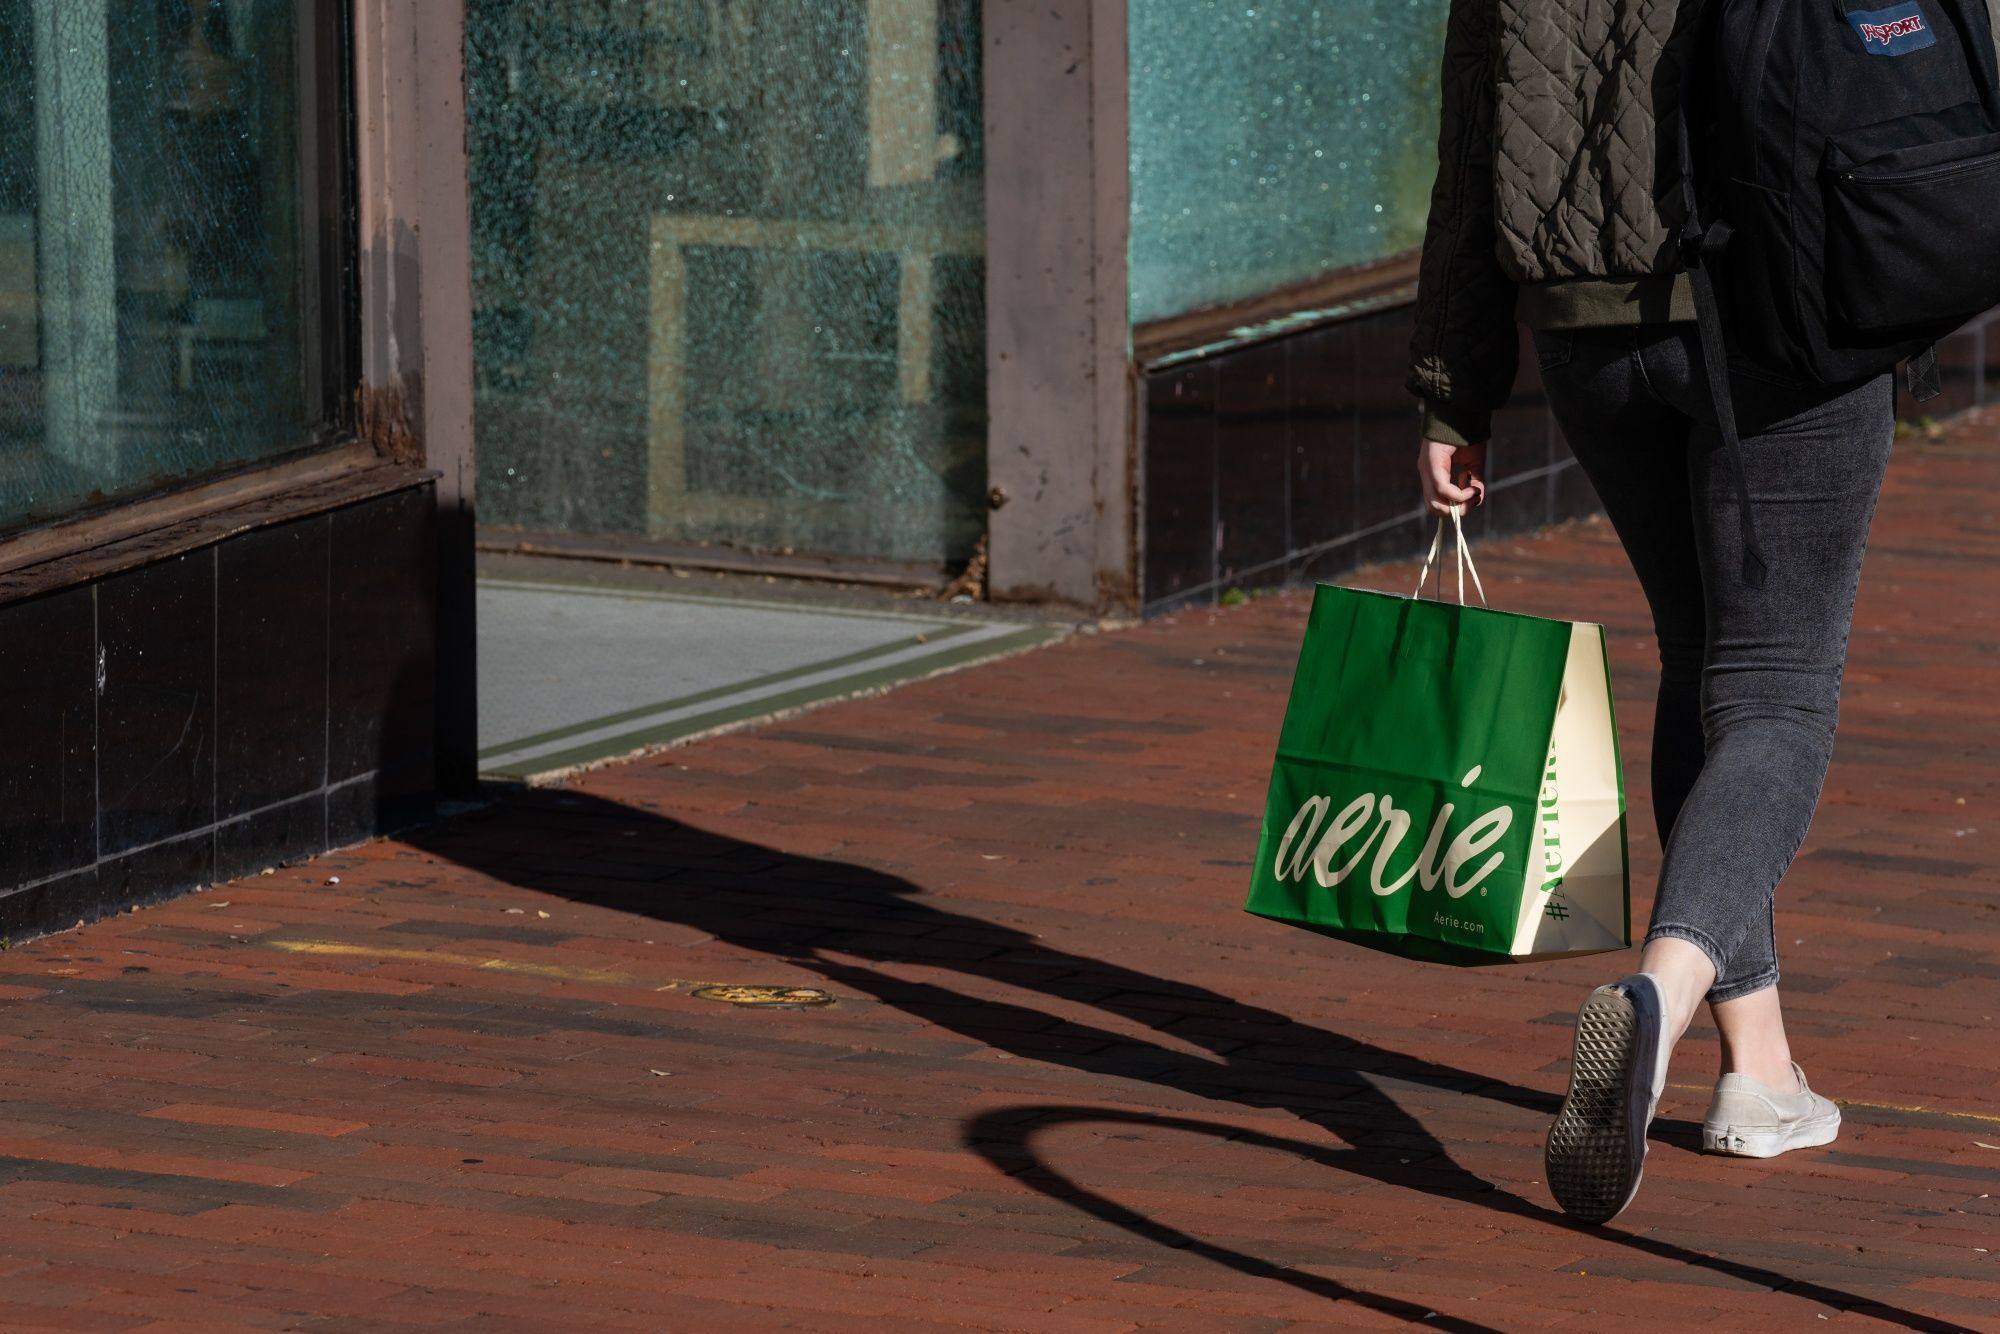 A pedestrian carries a shopping bag in the Georgetown neighbourhood of Washington on November 9. Consumer confidence has already been deeply shaken by the pandemic and the war in Ukraine, but the cost-of-living squeeze is leaving a deeper wound. Photo: Bloomberg